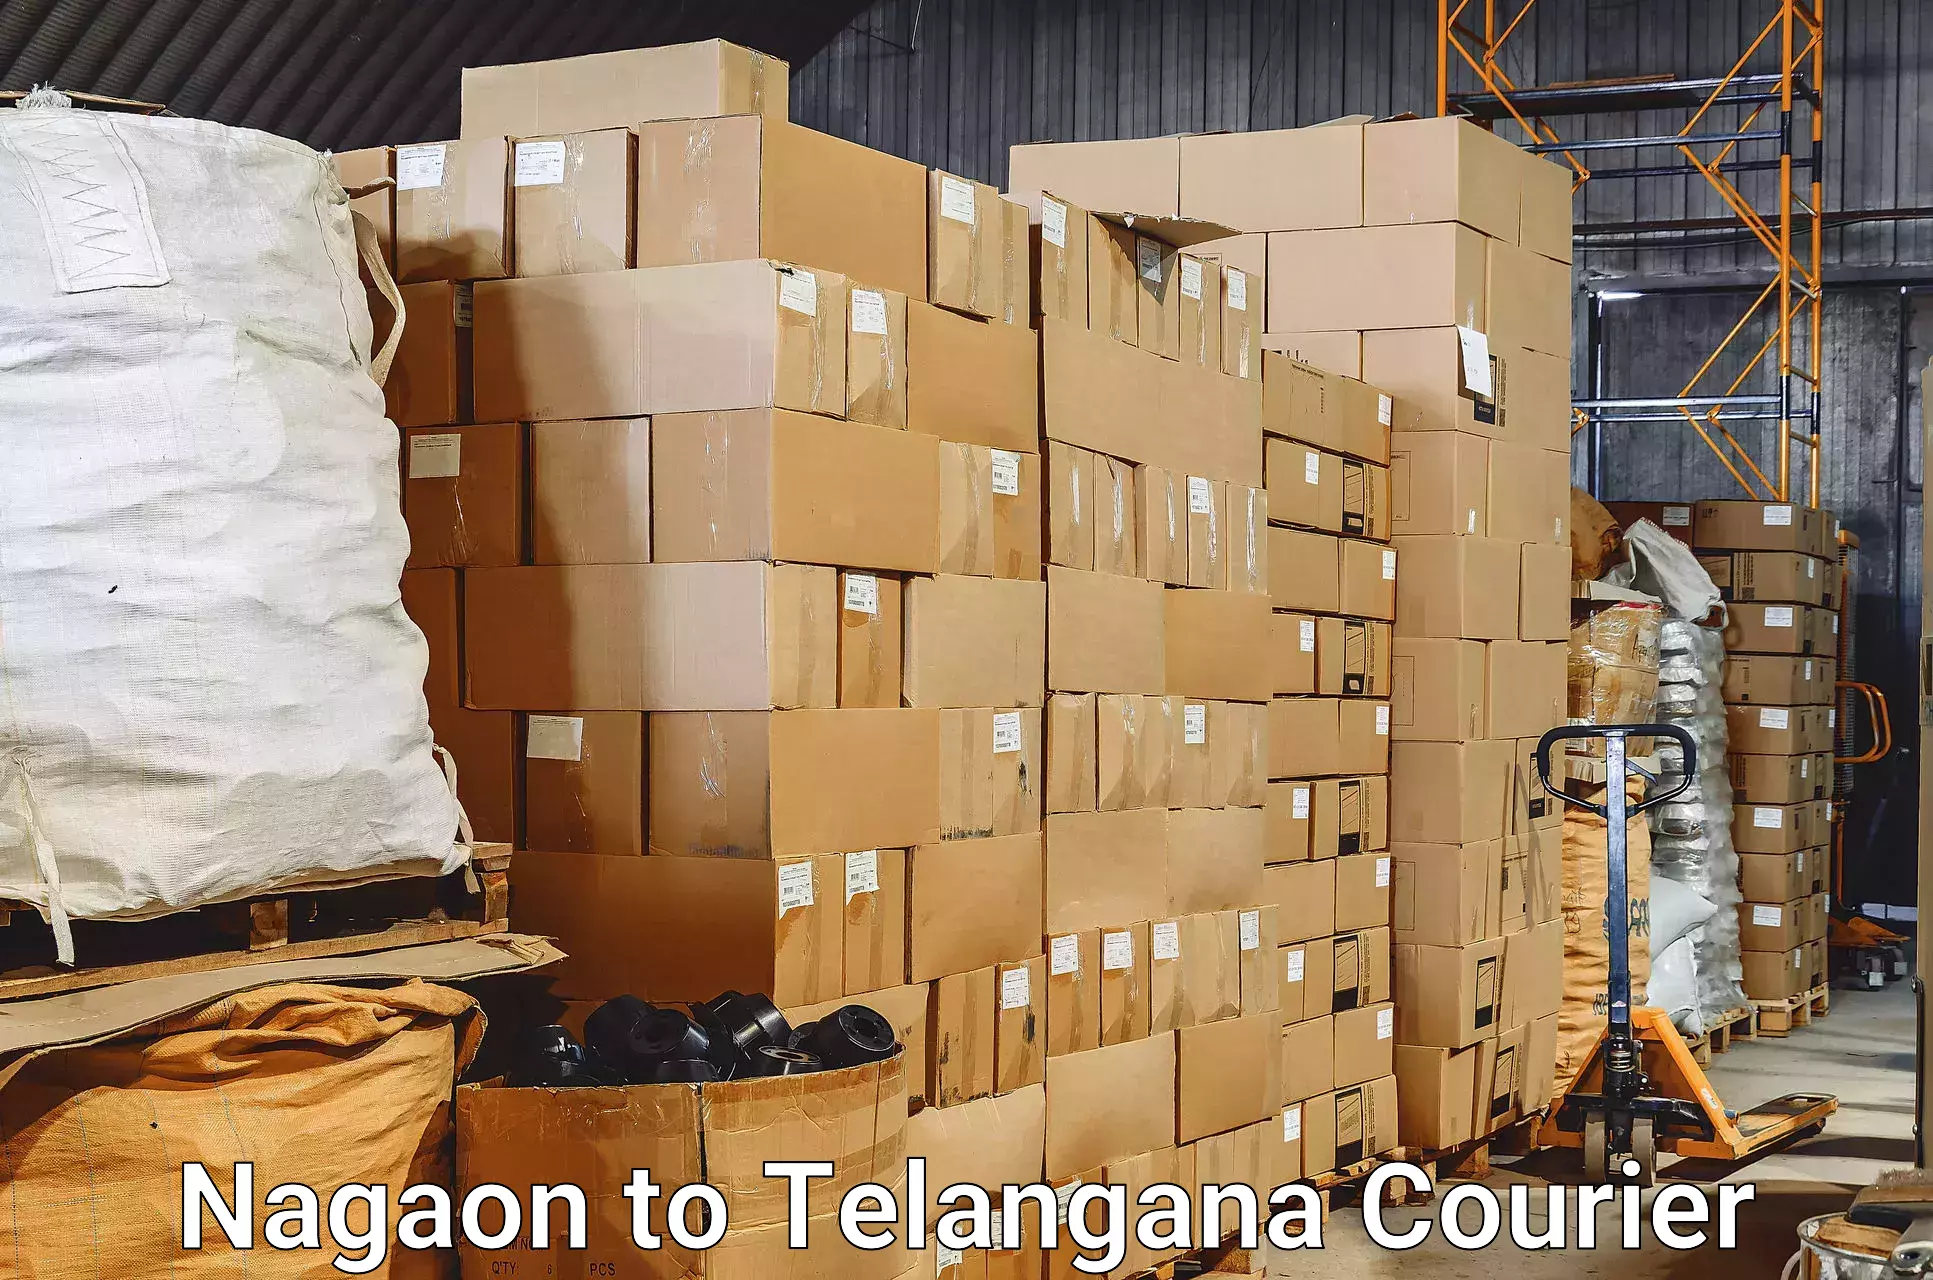 Instant baggage transport quote Nagaon to Jainad